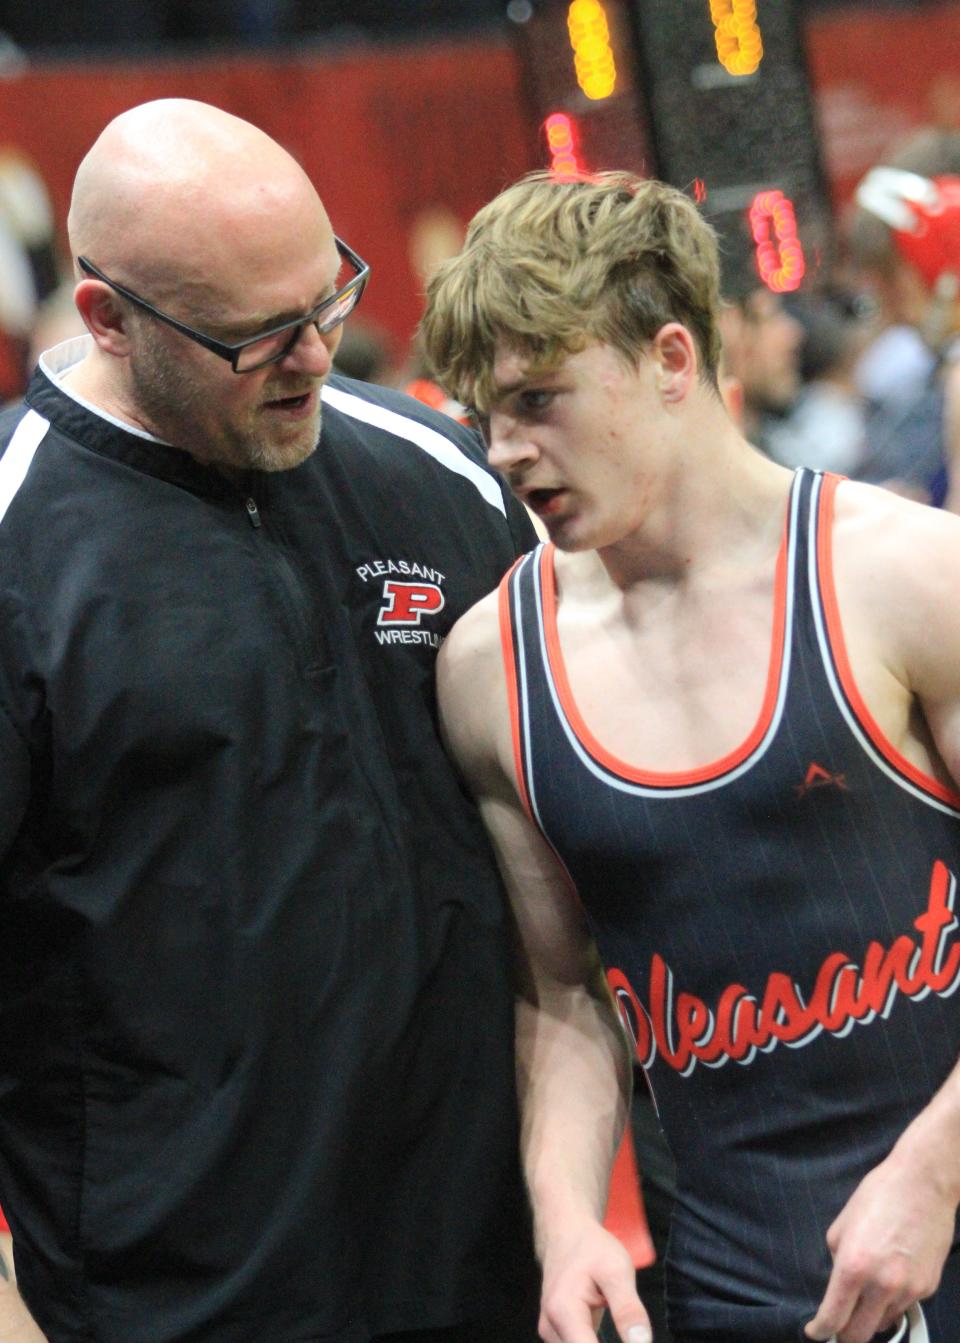 Pleasant's Daxton Chase talks to his dad and assistant wrestling coach Steve Chase following a victory in the 150-pound class during the Division III state wrestling tournament at Ohio State's Schottenstein Center. Chase went on to finish as the state runner-up.